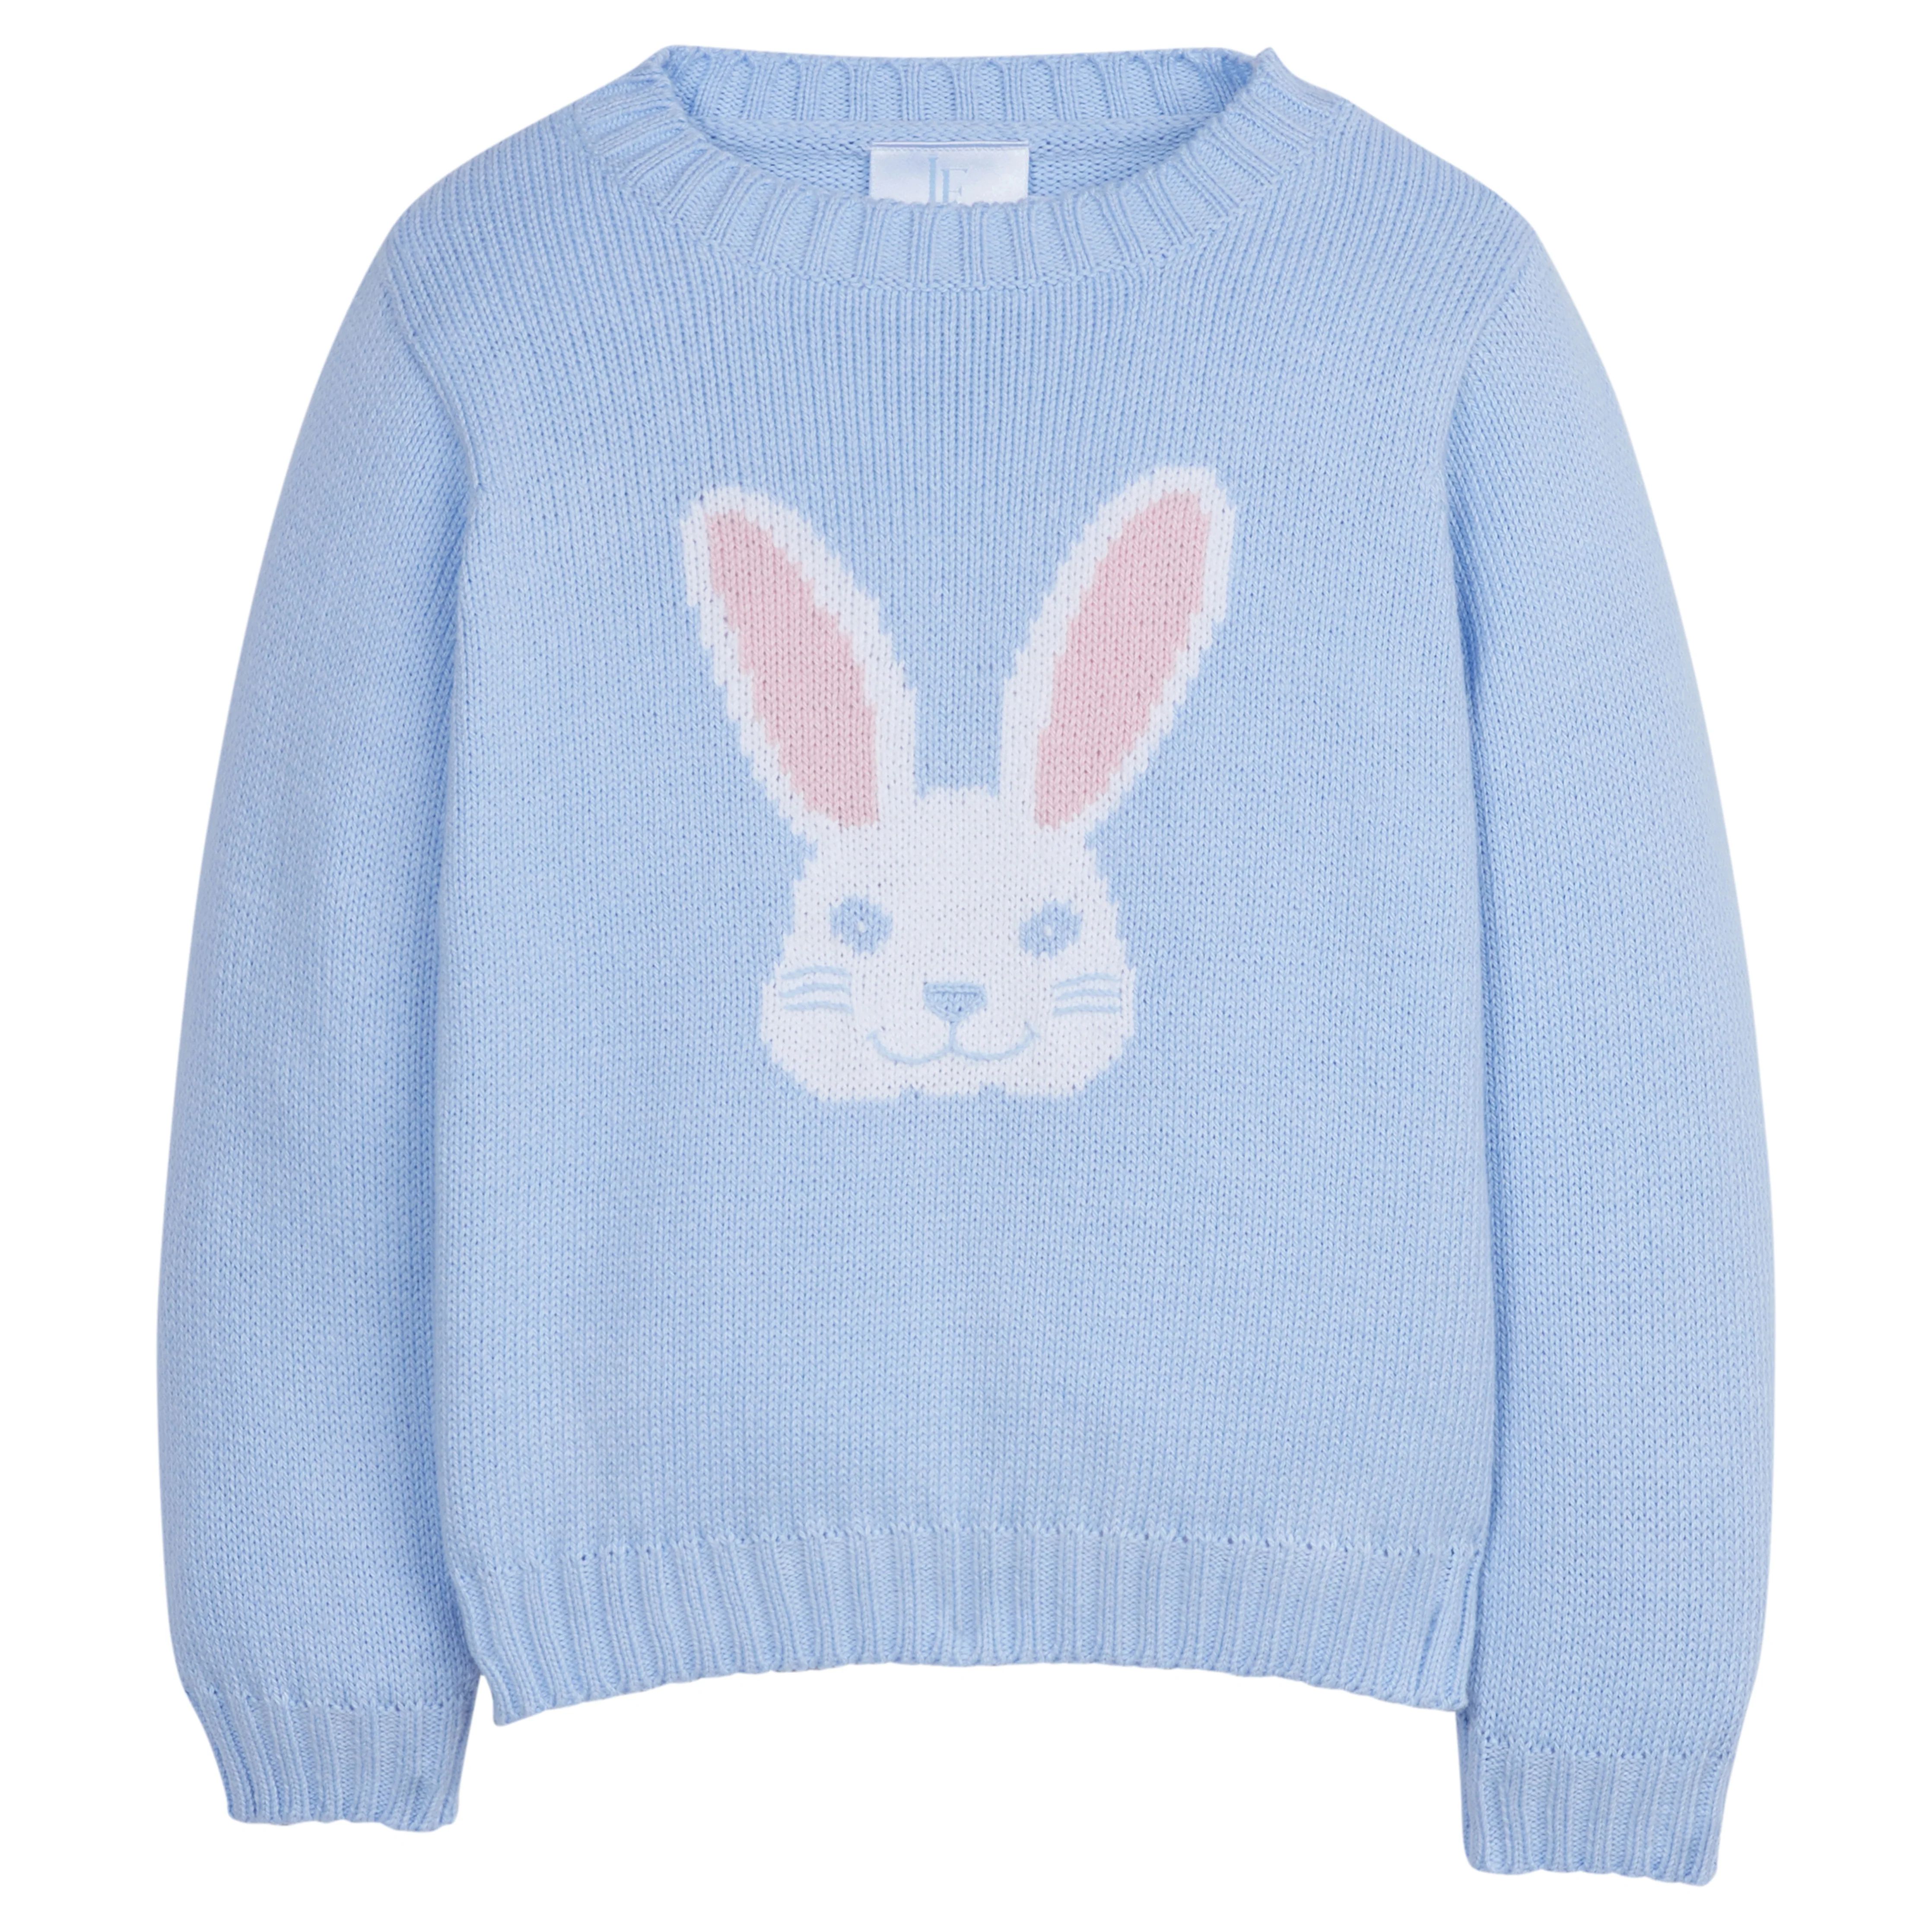 Bunny Sweater - Childrens Easter Holiday Clothes | Little English